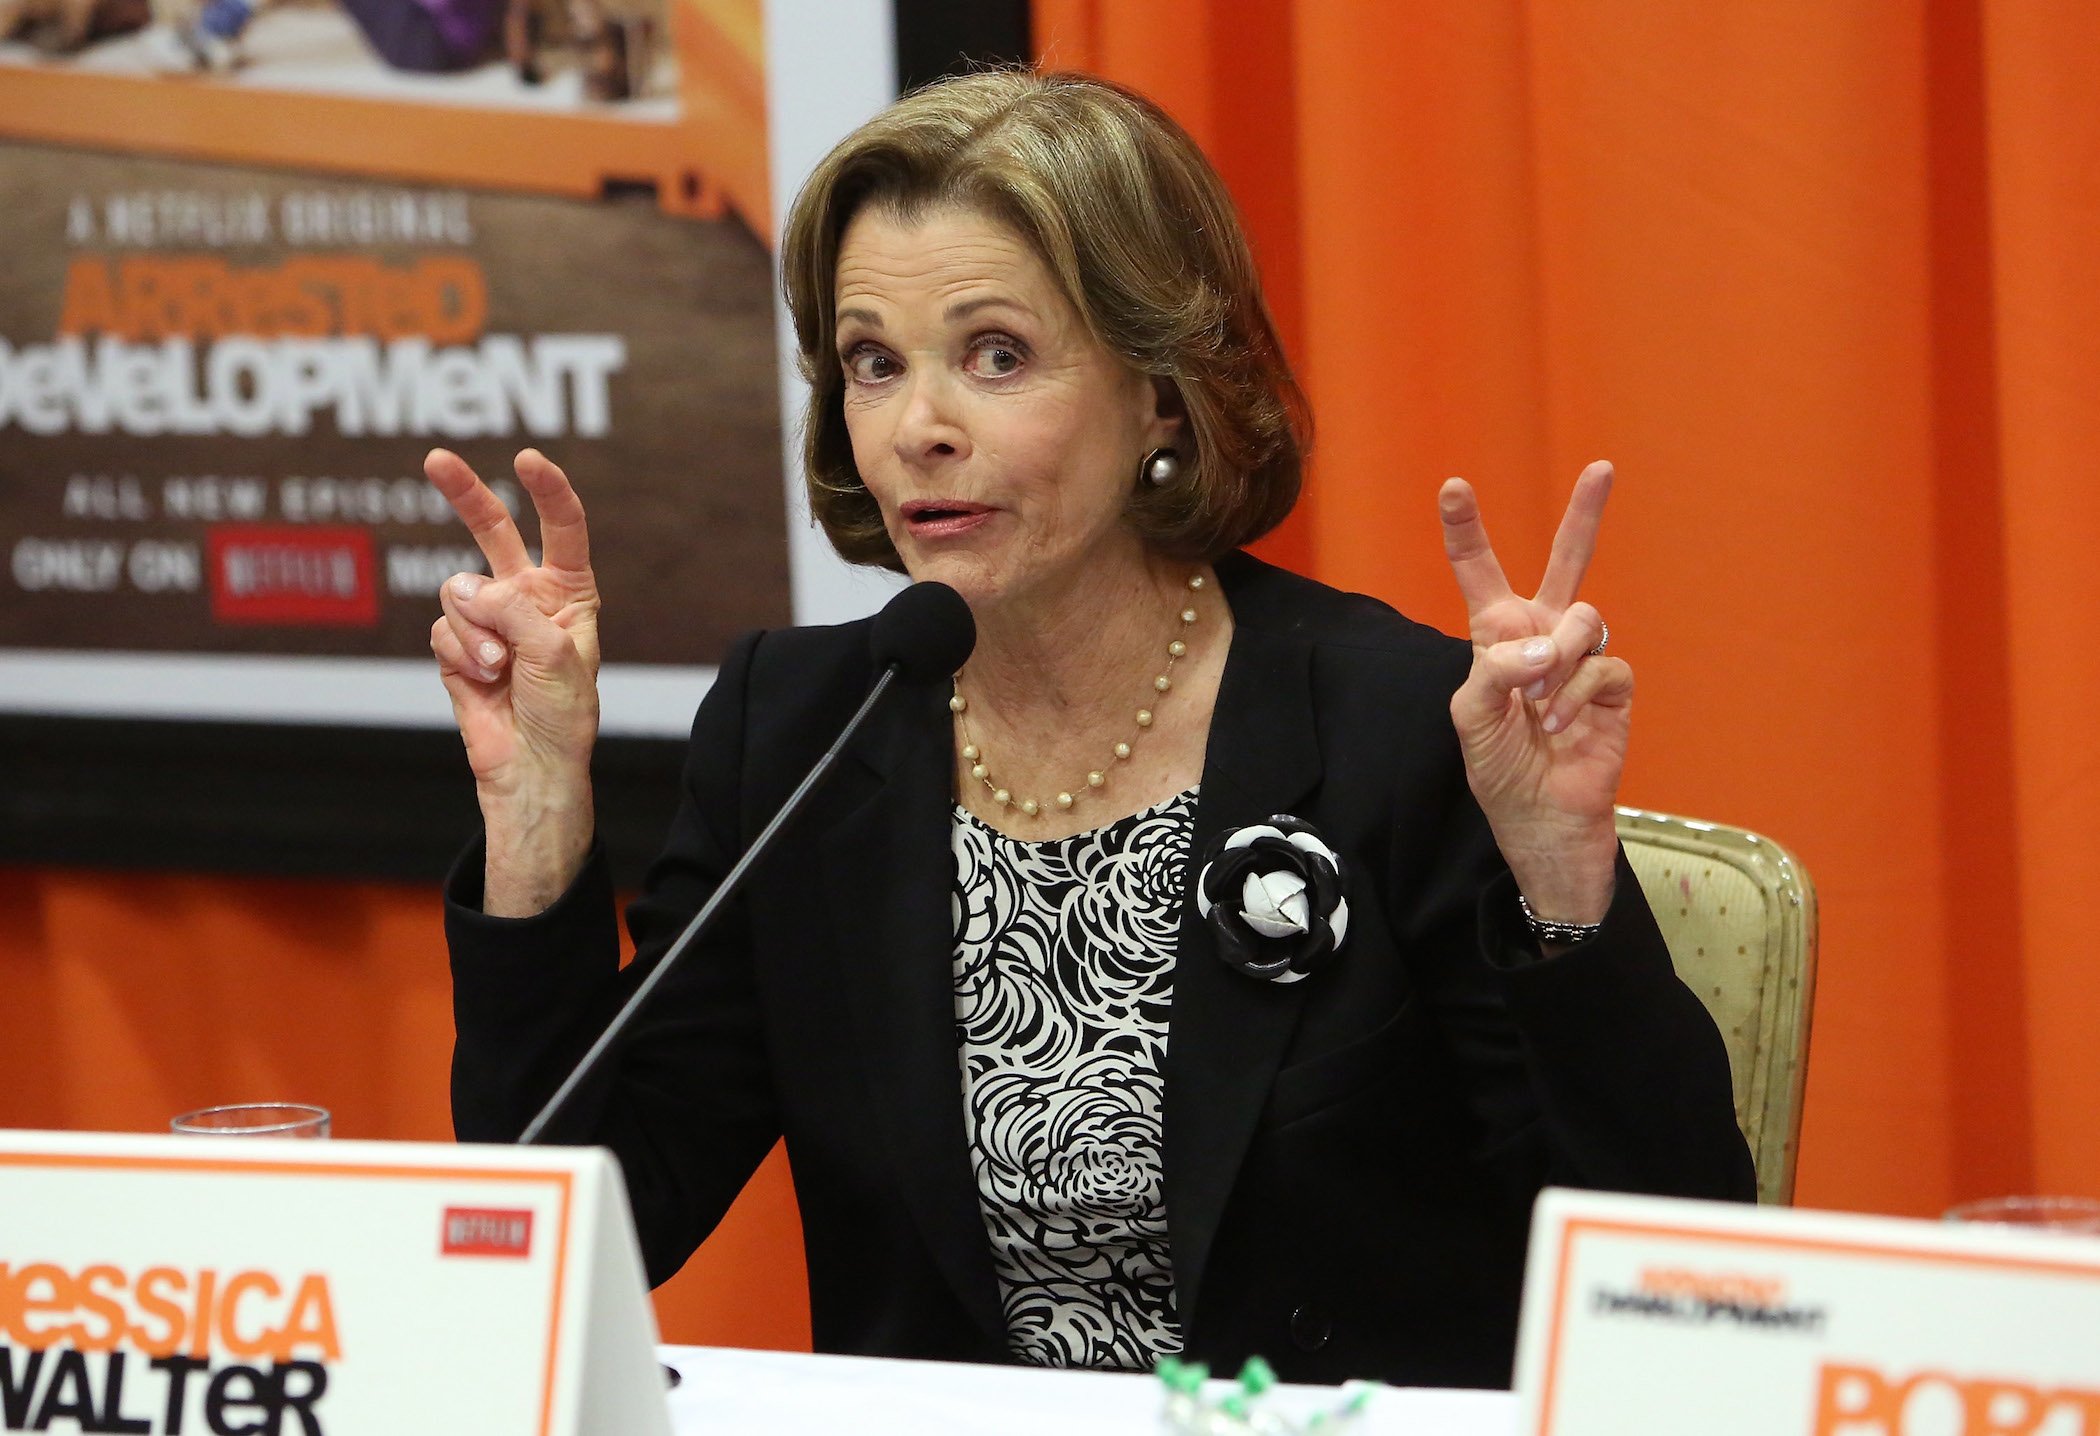 How Much Did Jessica Walter Make From ‘Arrested Development’?